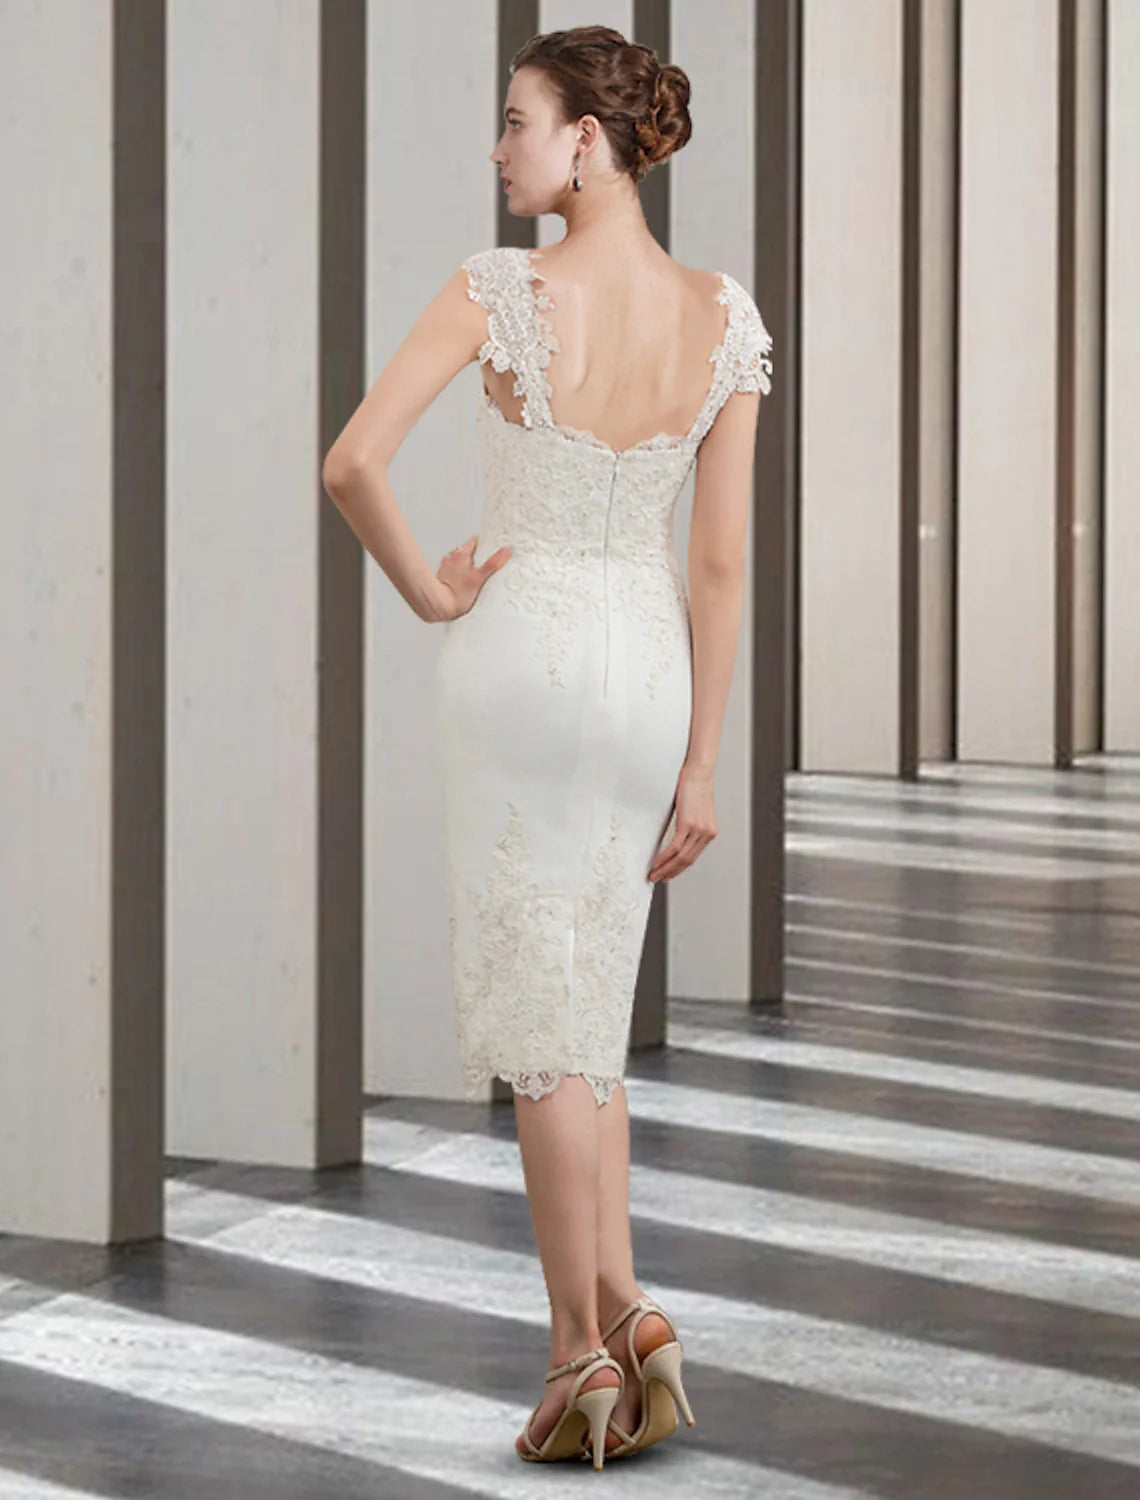 Two Piece Sheath / Column Mother of the Bride Dress Wedding Guest Church Elegant Jewel Neck Knee Length Chiffon Lace Sleeveless with Beading Appliques Fall